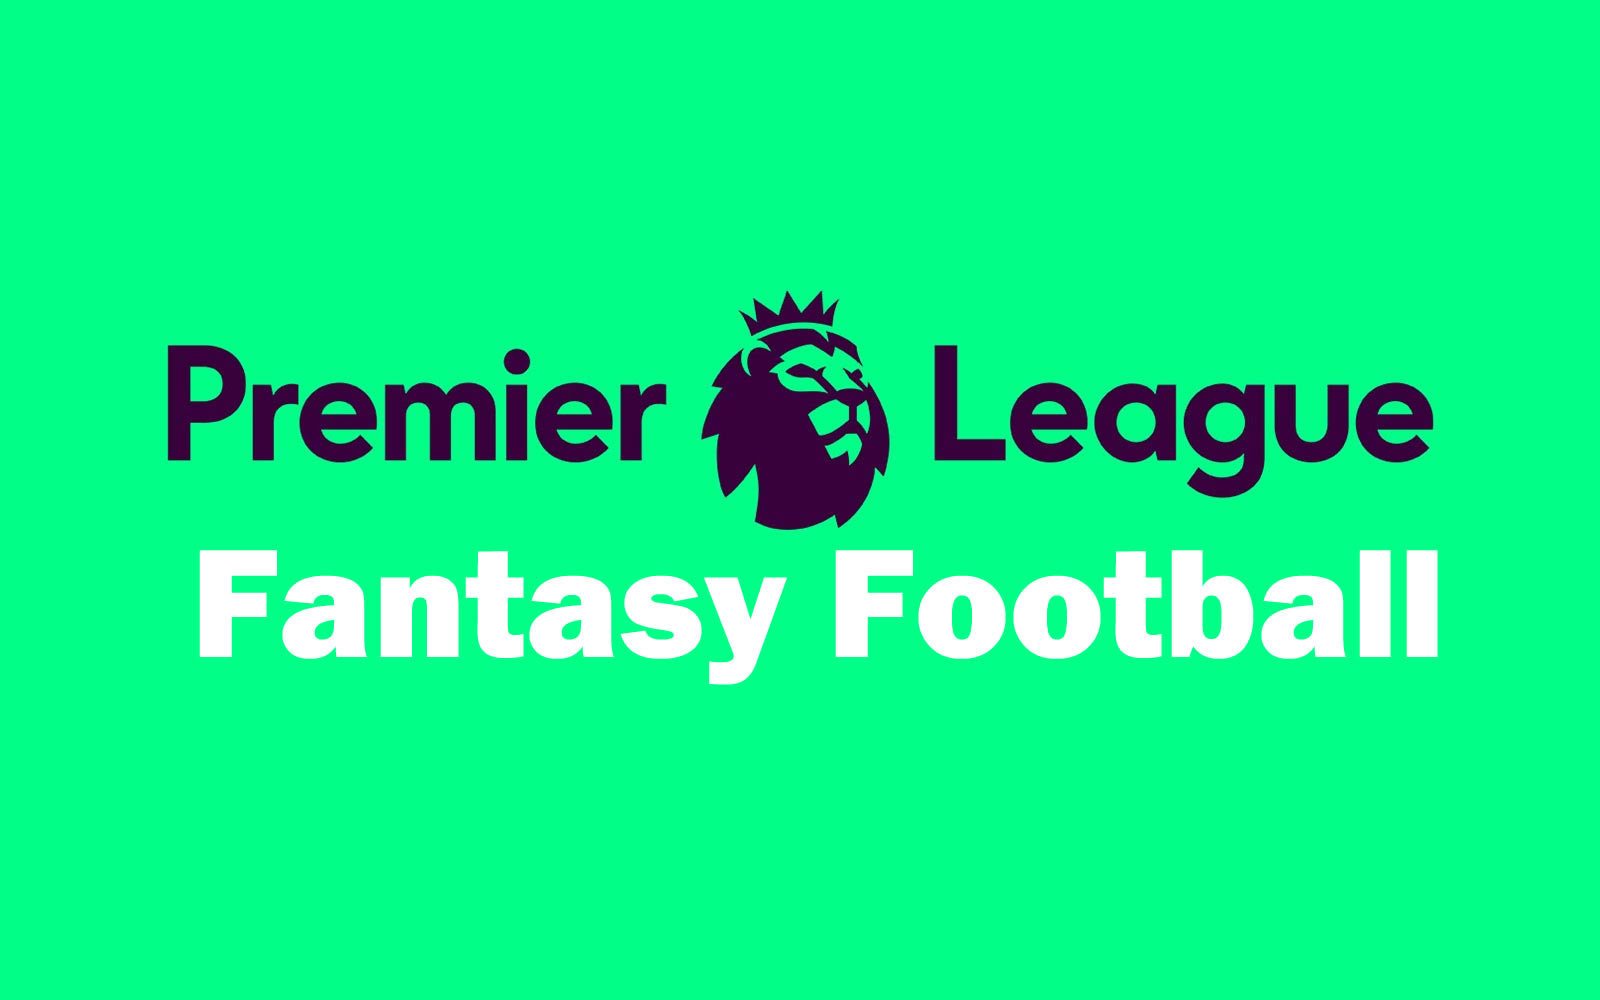 Sign up to the EAL Fantasy Football League